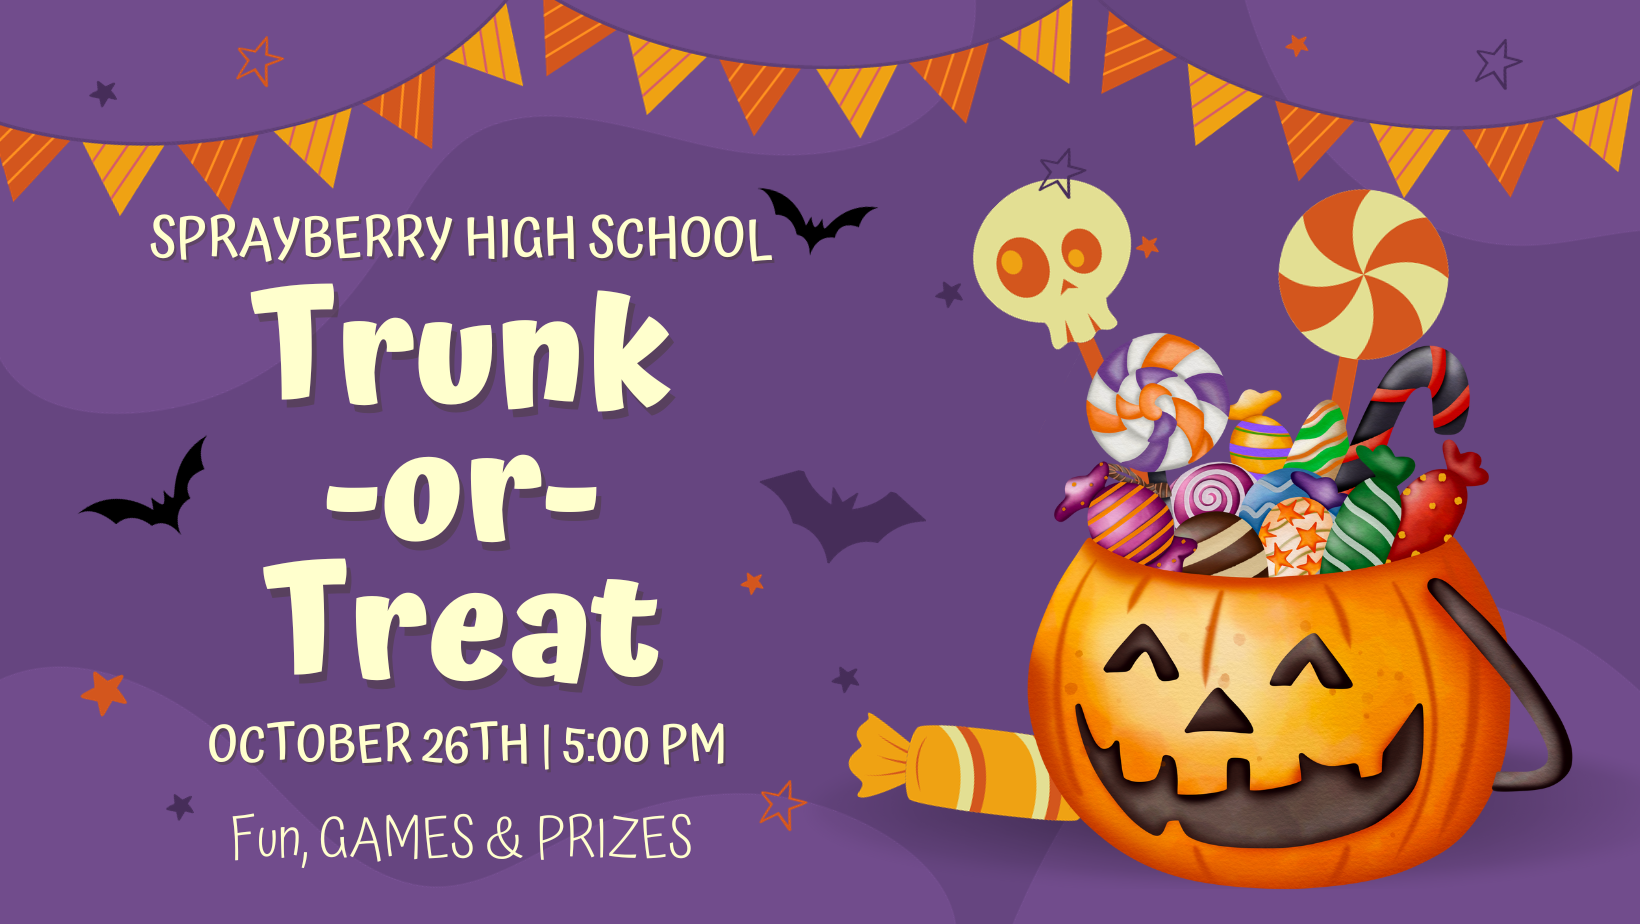 Trunk-or-Treat at Sprayberry High School